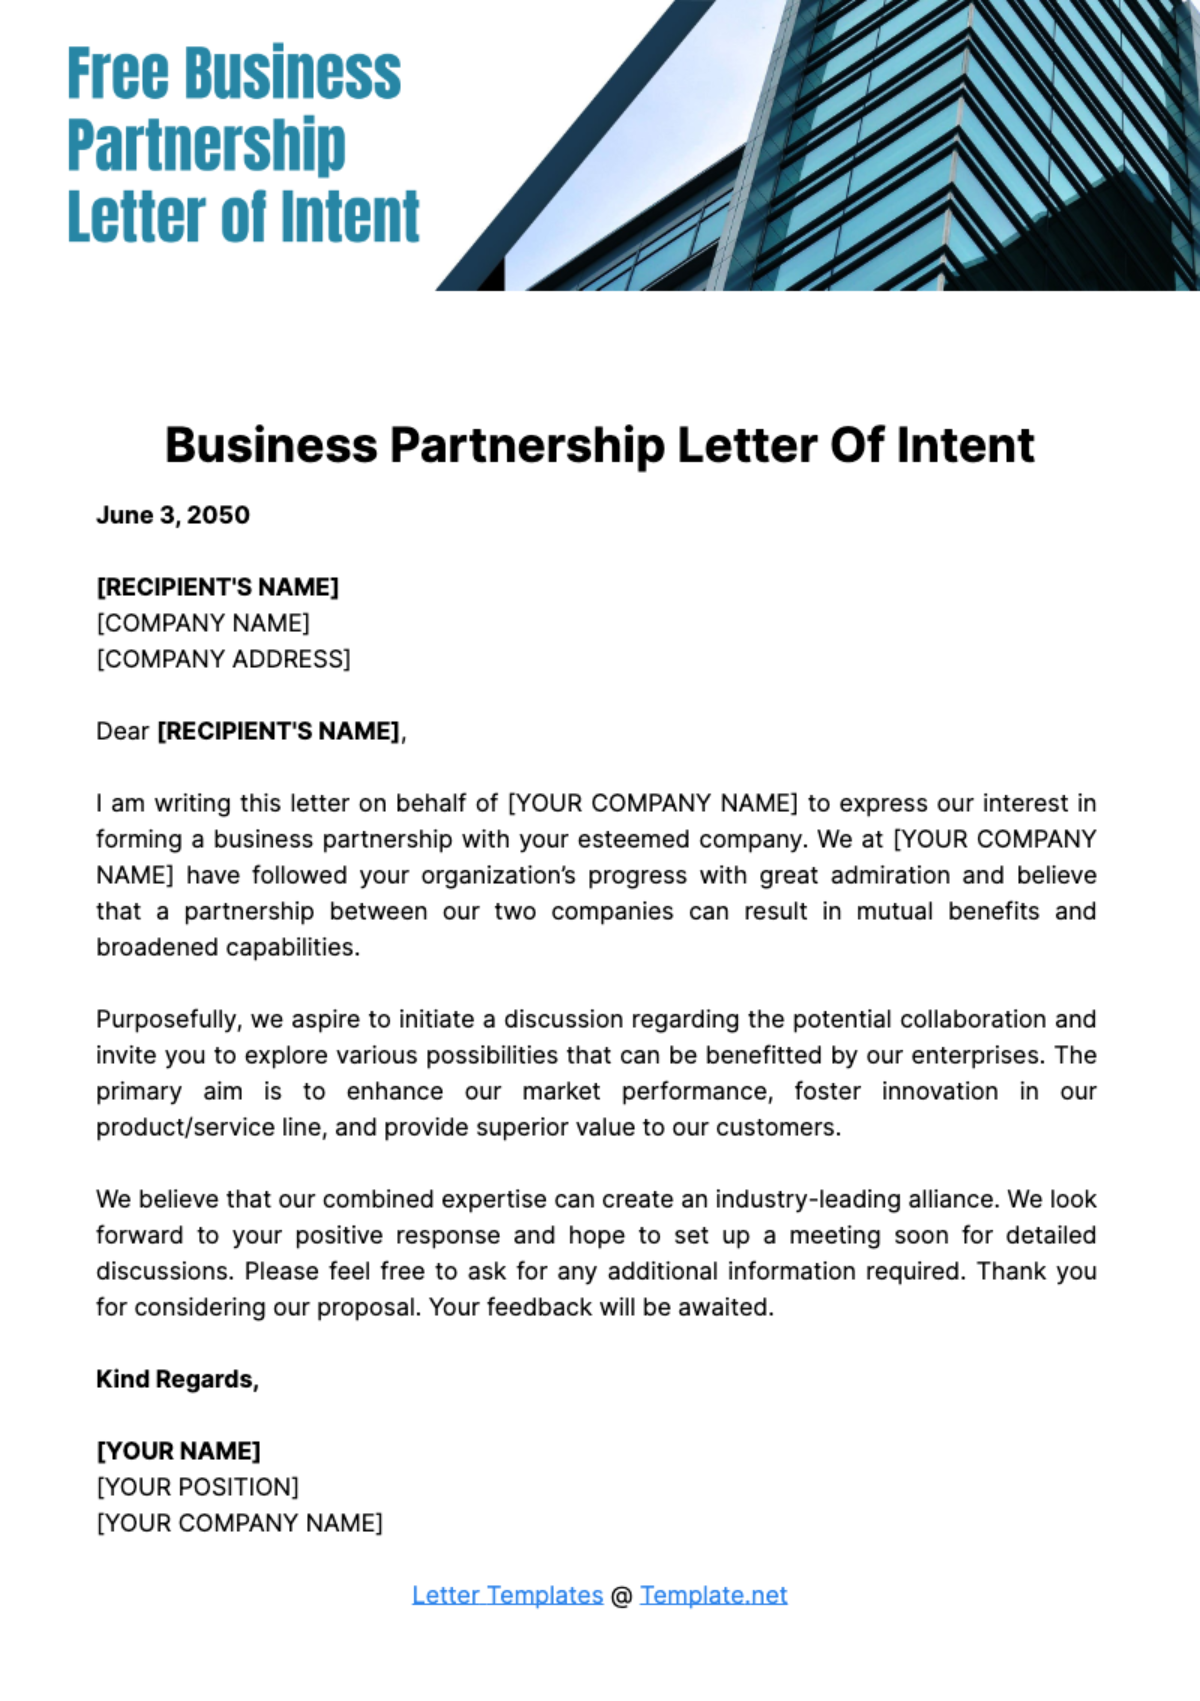 Free Business Partnership Letter of Intent Template